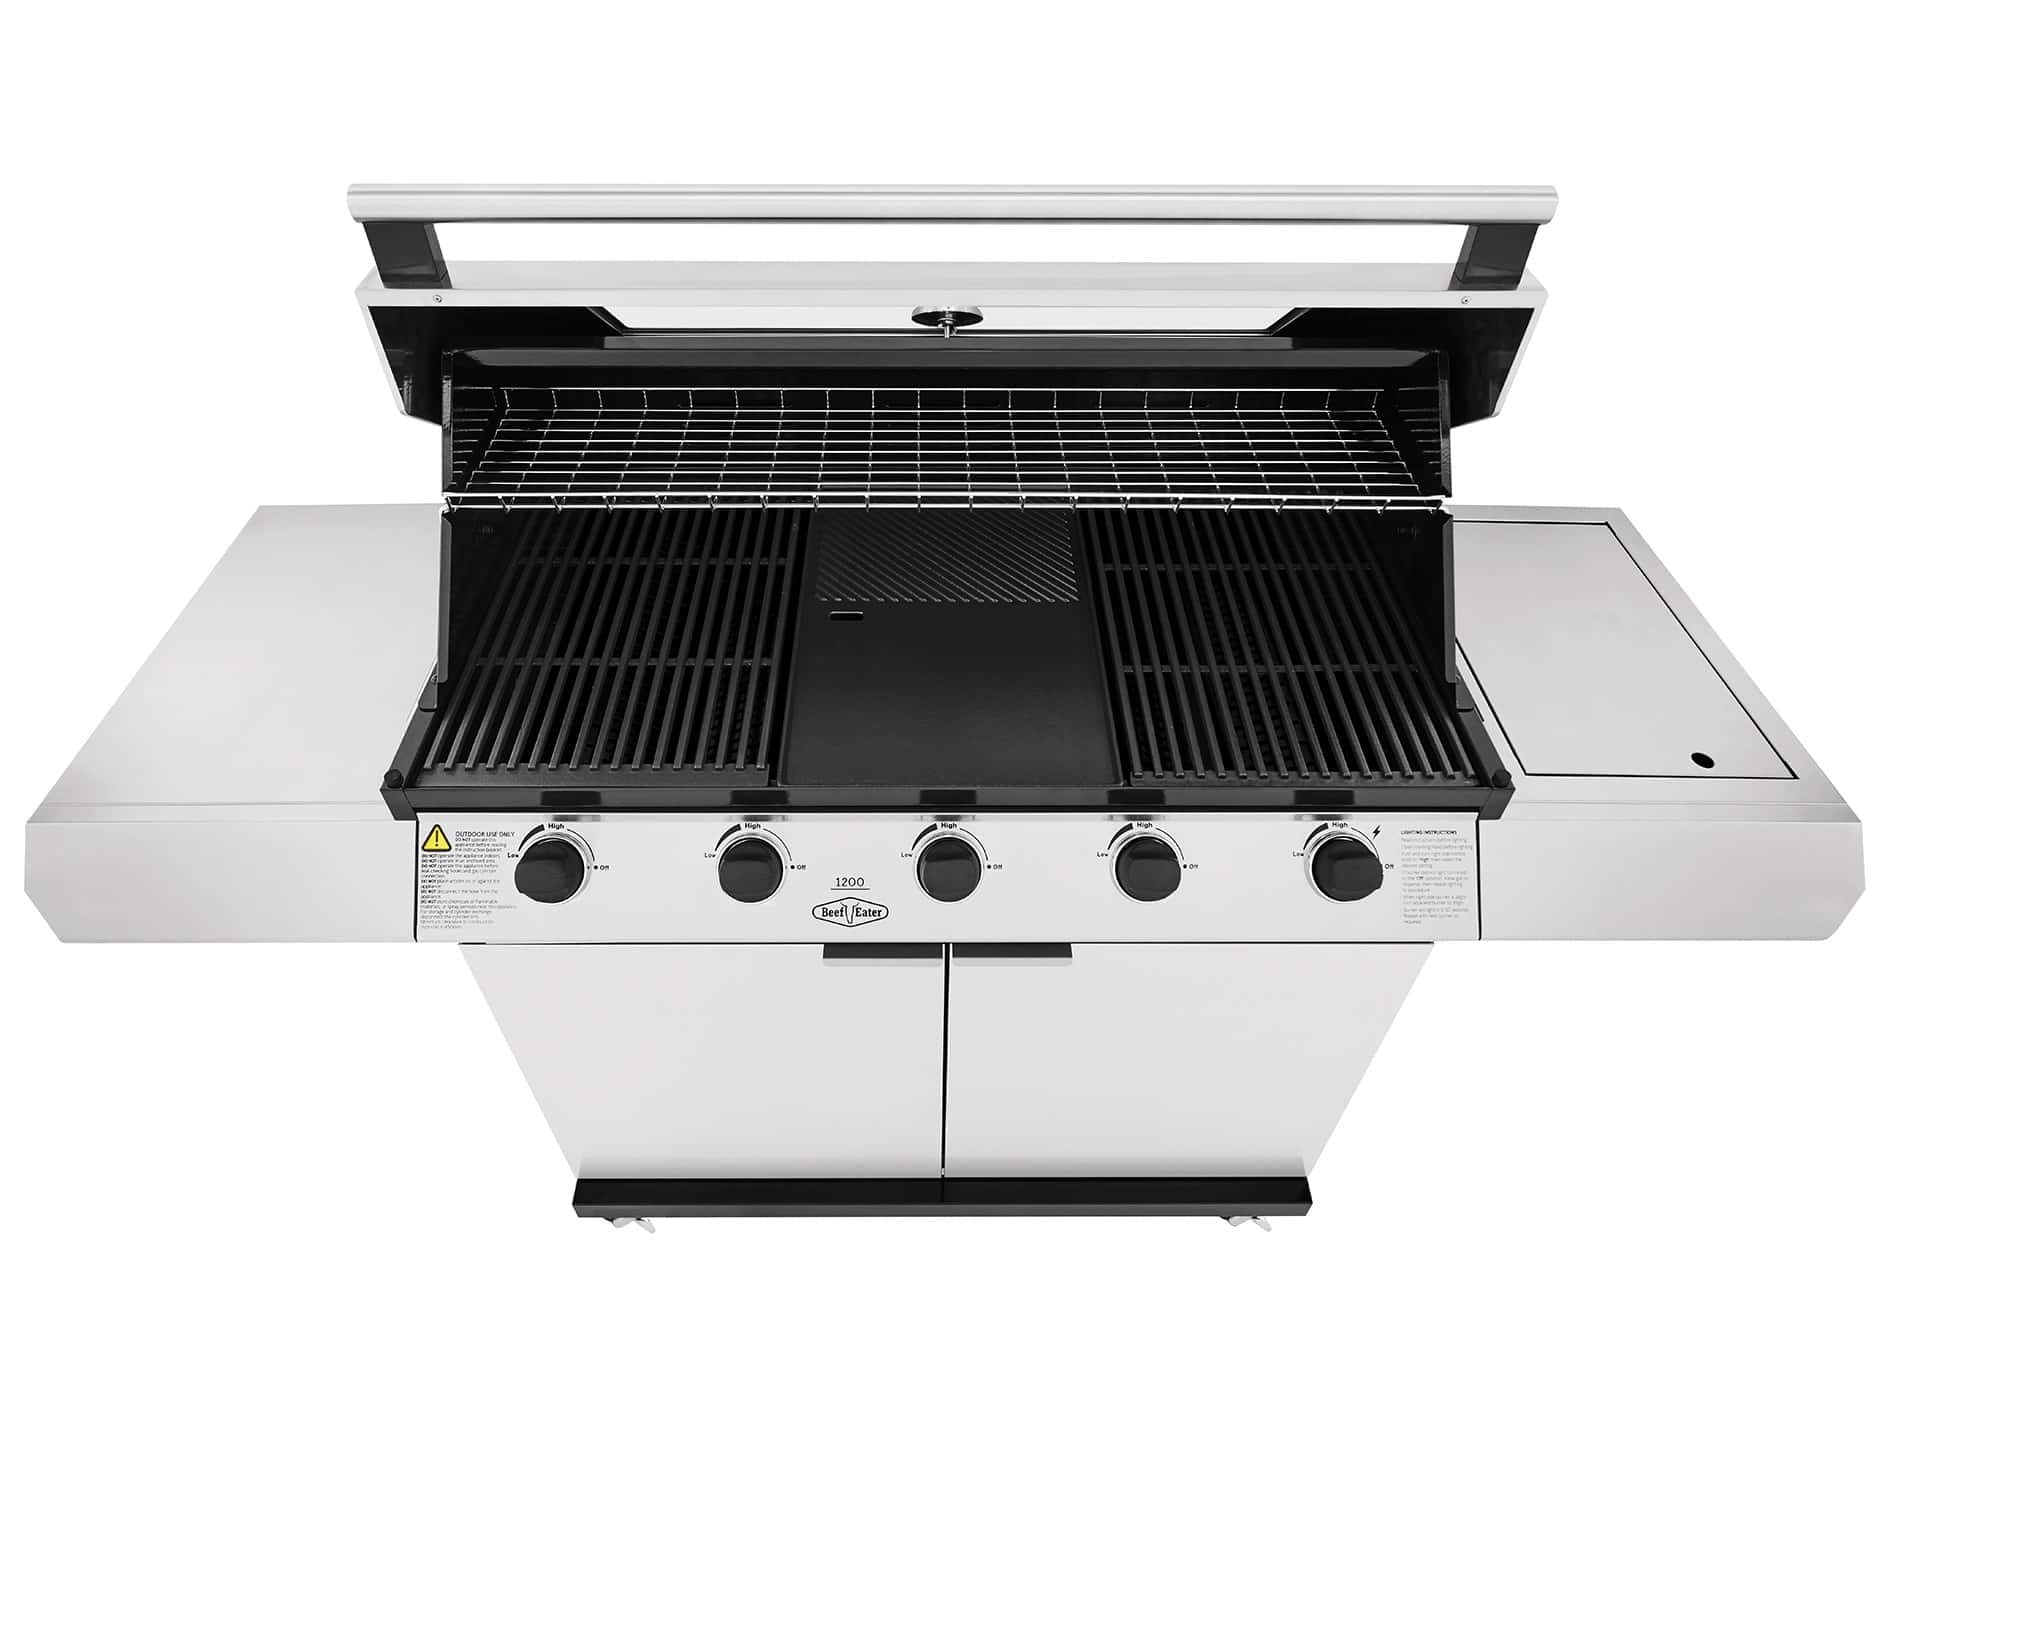 Beefeater 1200S Series - 5 Burner Freestanding Gas Barbecue